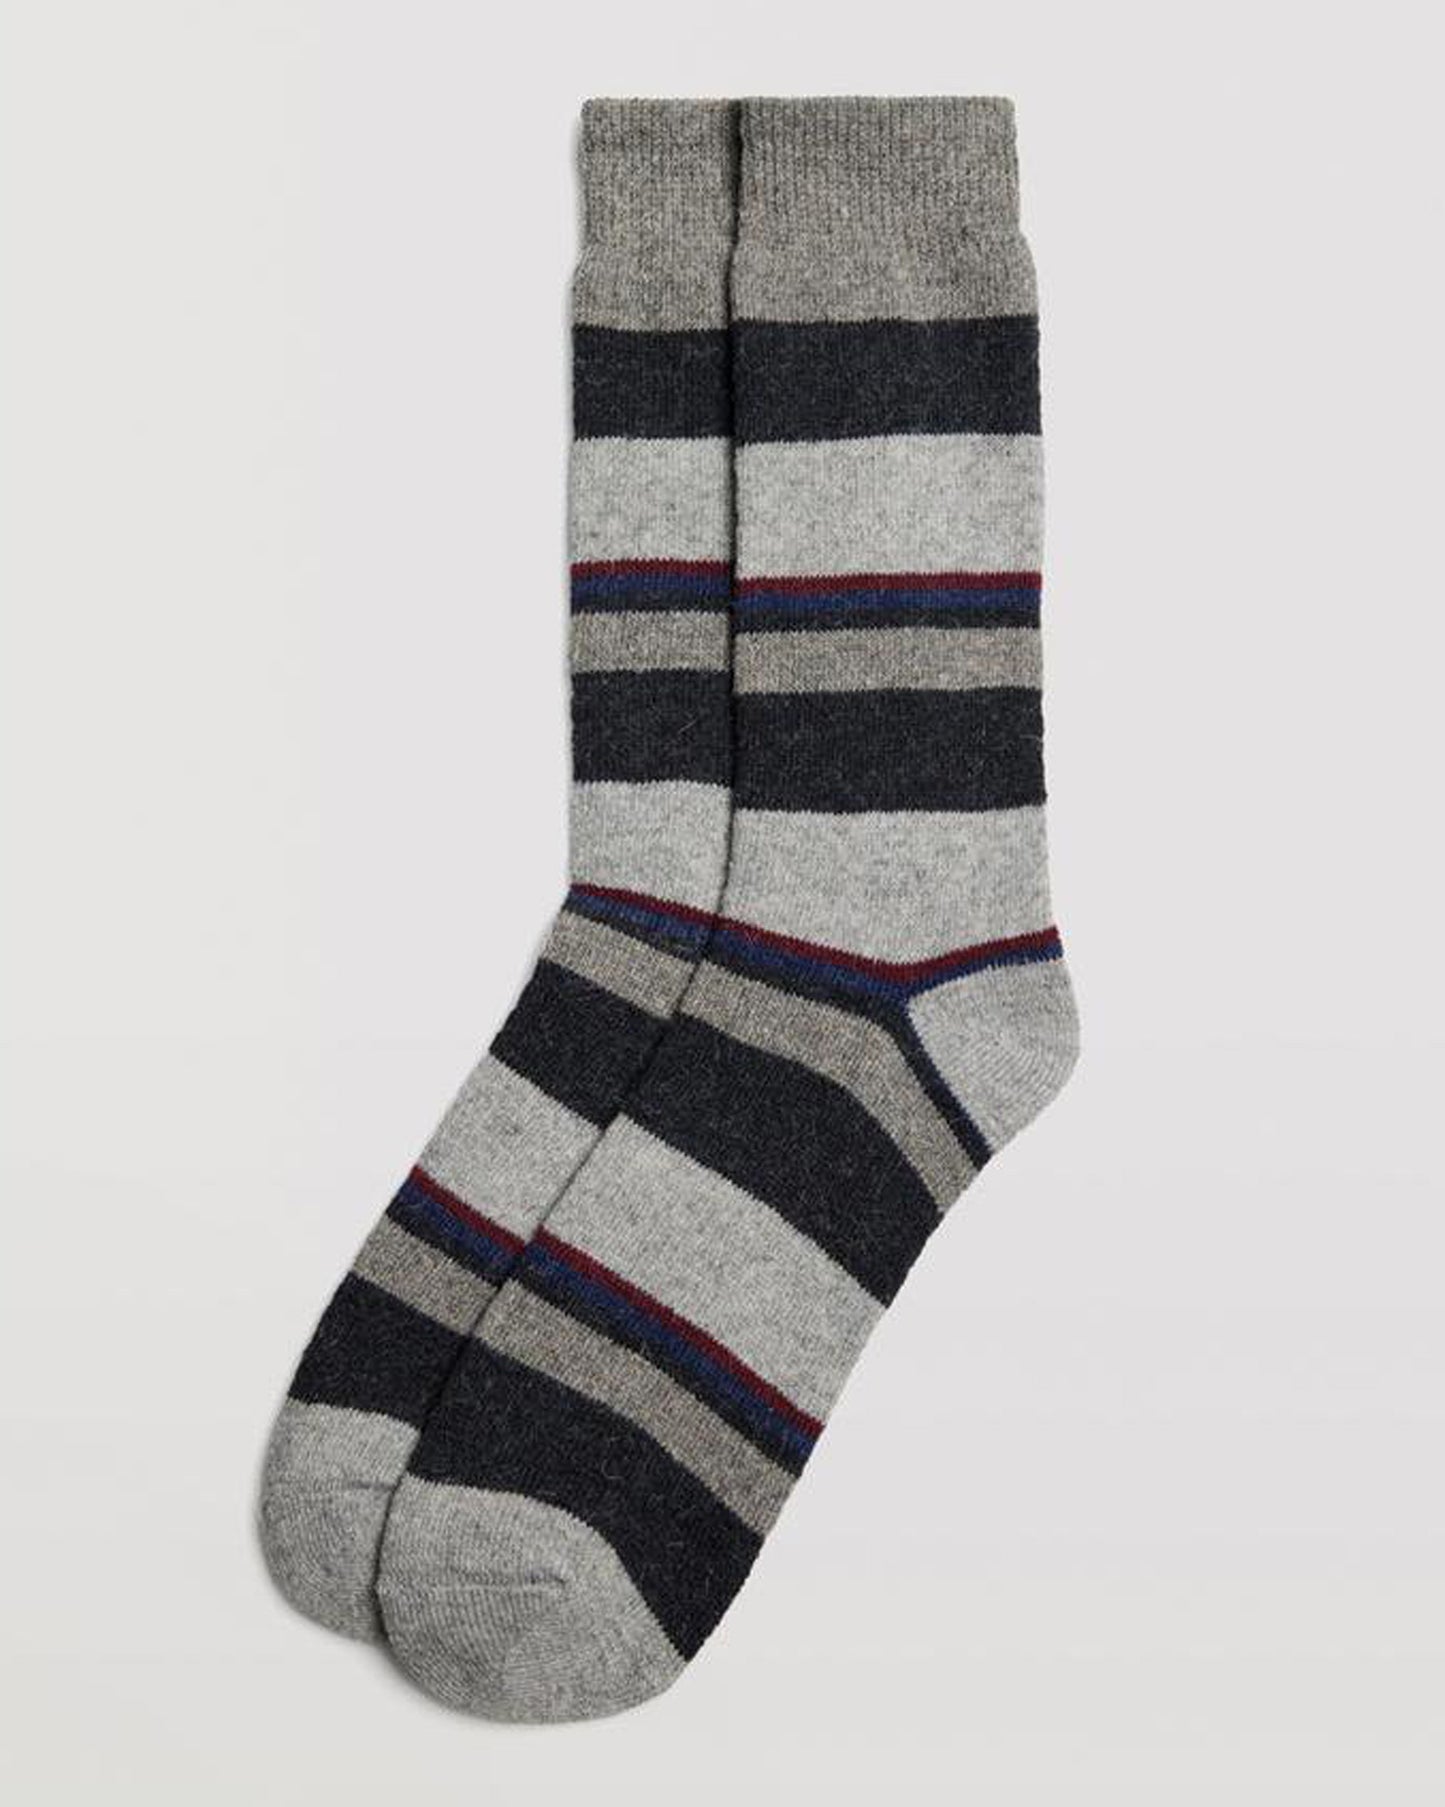 Ysabel Mora 22891 Linear Thermal Sock - Warm wool and angora mix light grey thermal socks with a horizontal stripe pattern in dark grey, navy blue and wine, shaped heel and deep elasticated comfort top.